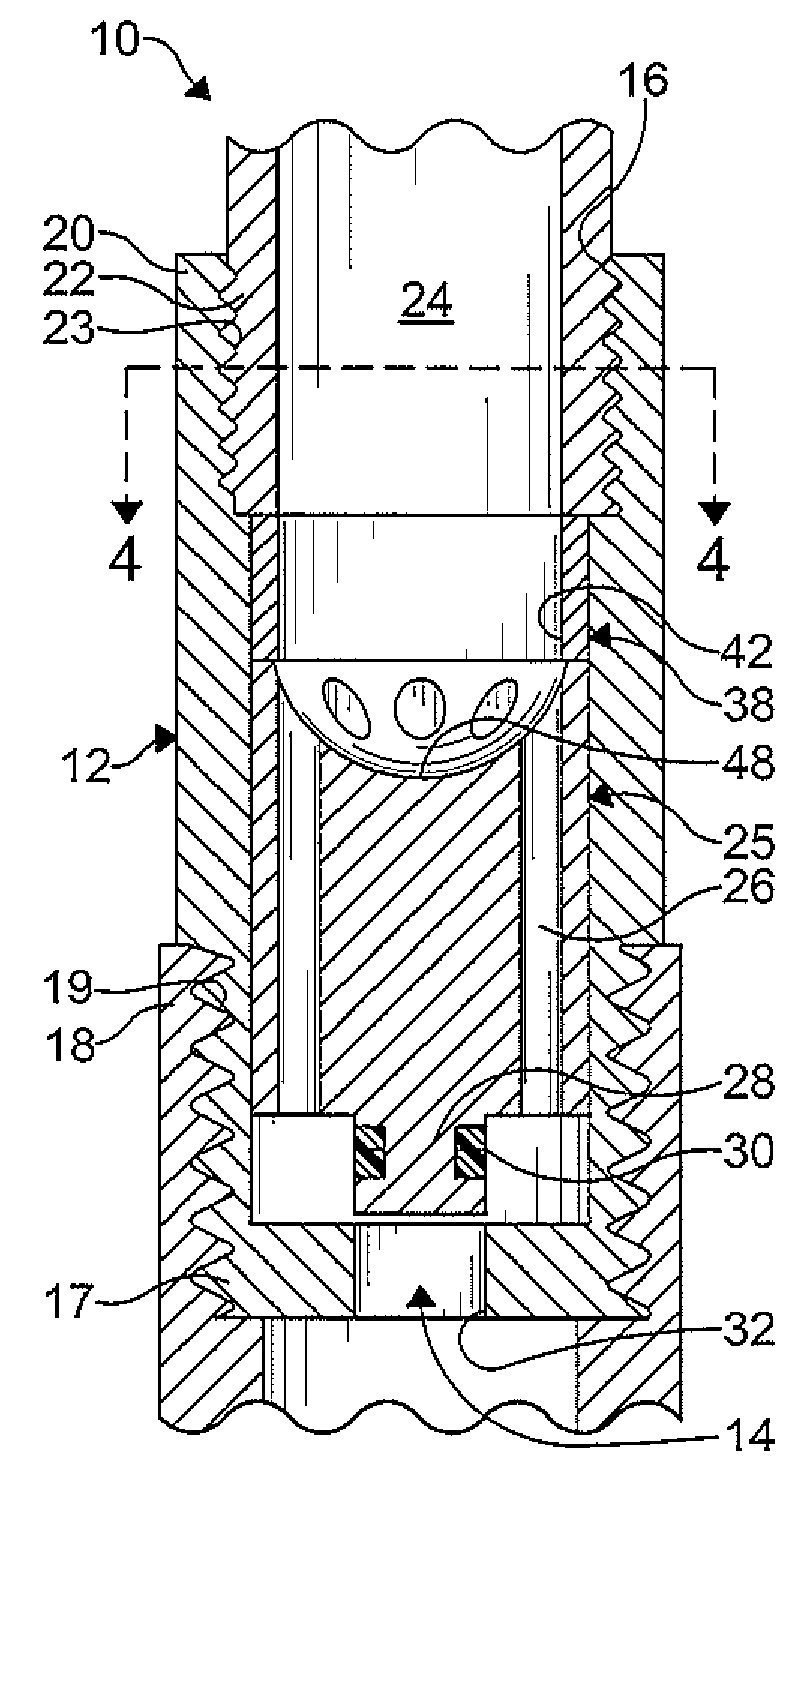 Thermal pressure relief device